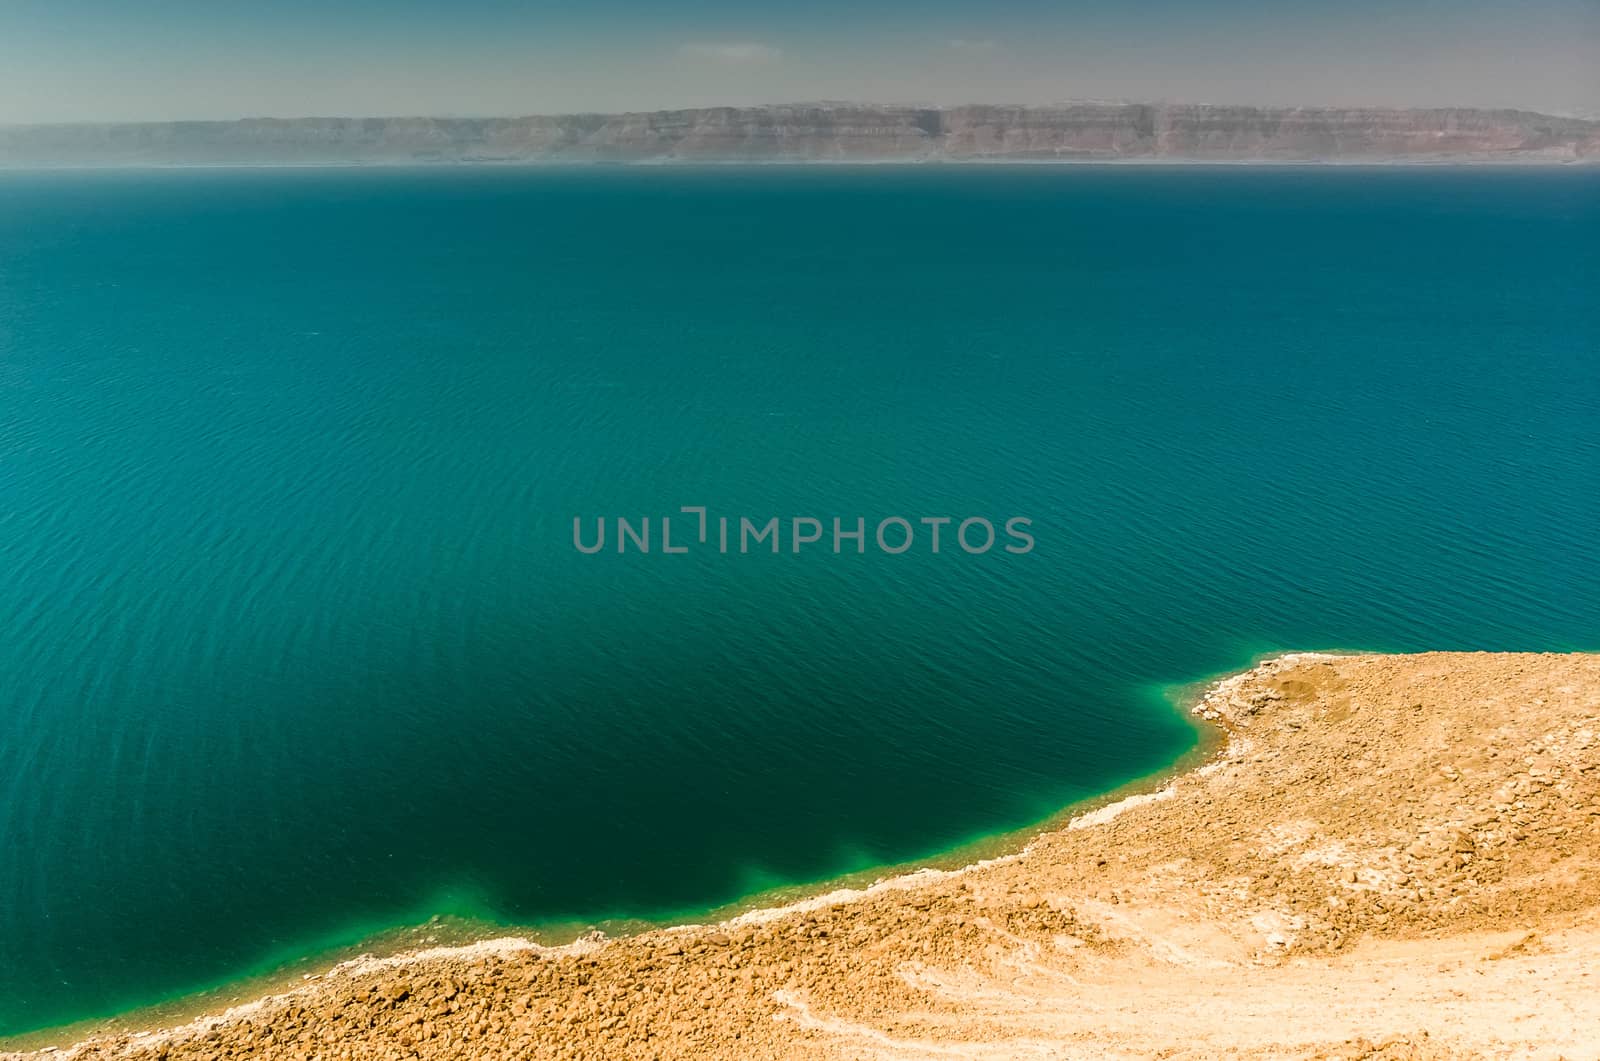 View from the Jordanian coast over the Dead Sea to the mountains on the west side in Israel, middle east